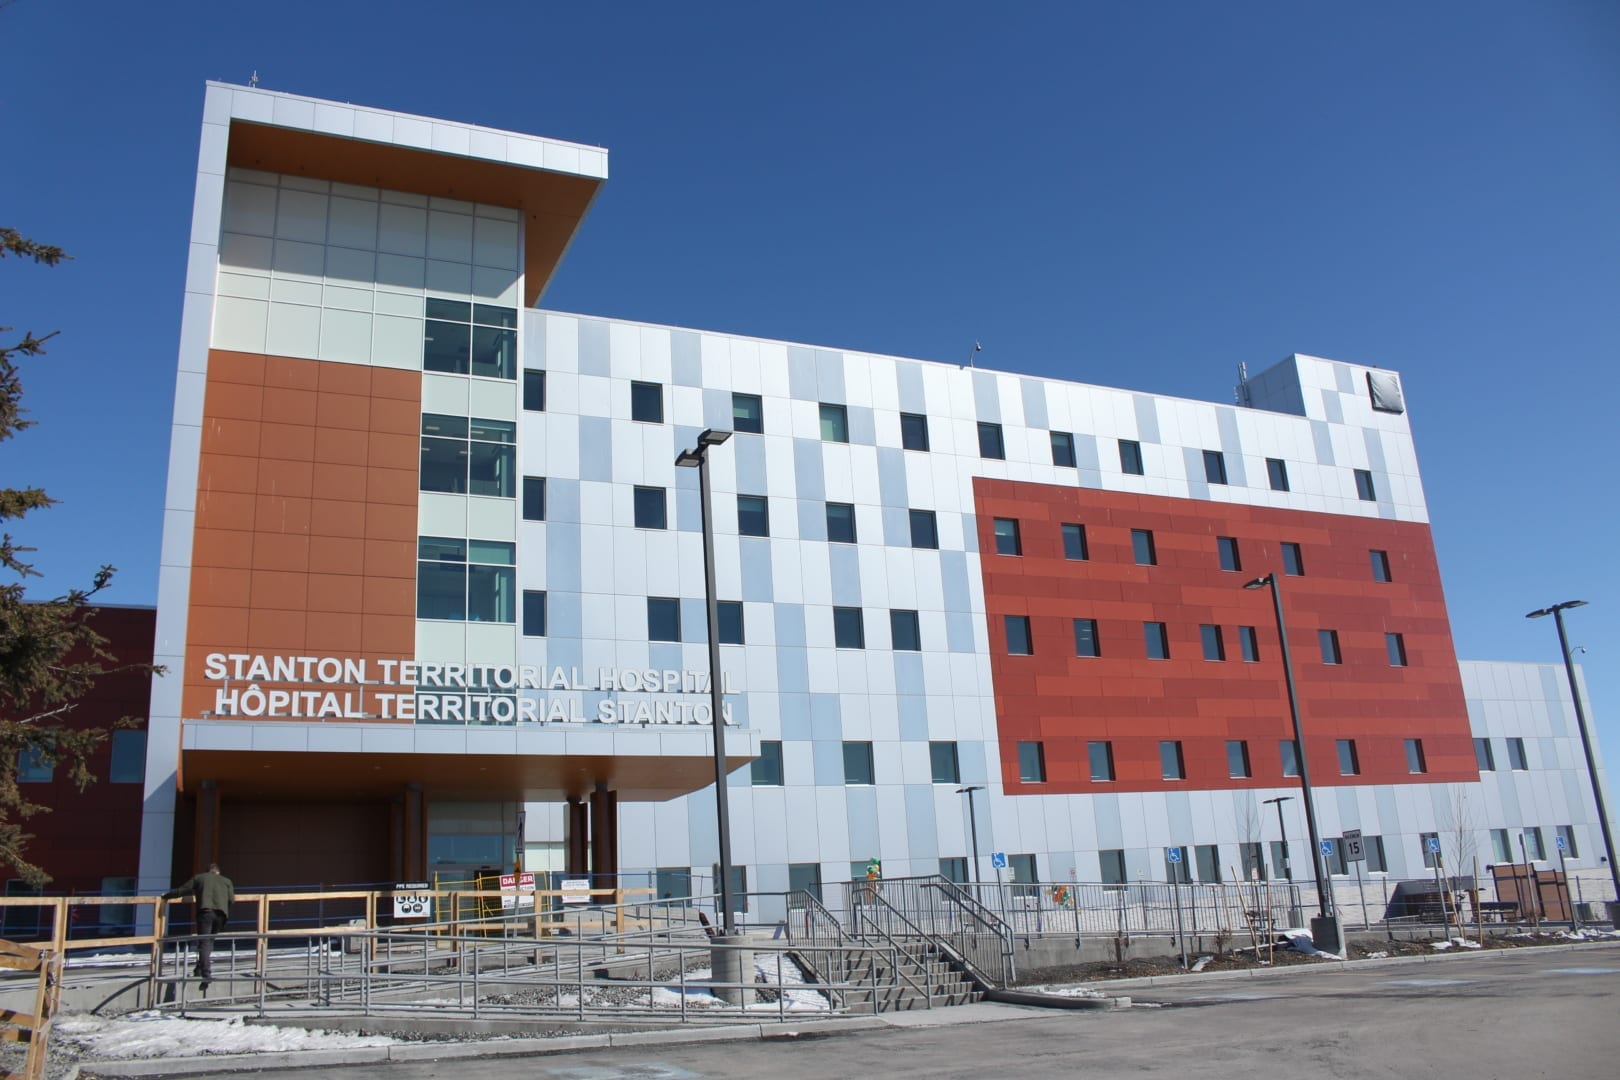 The new Stanton Territorial Hospital plans to open the doors to emergency services on May 26 at 6 a.m. Brett McGarry / NNSL Photo